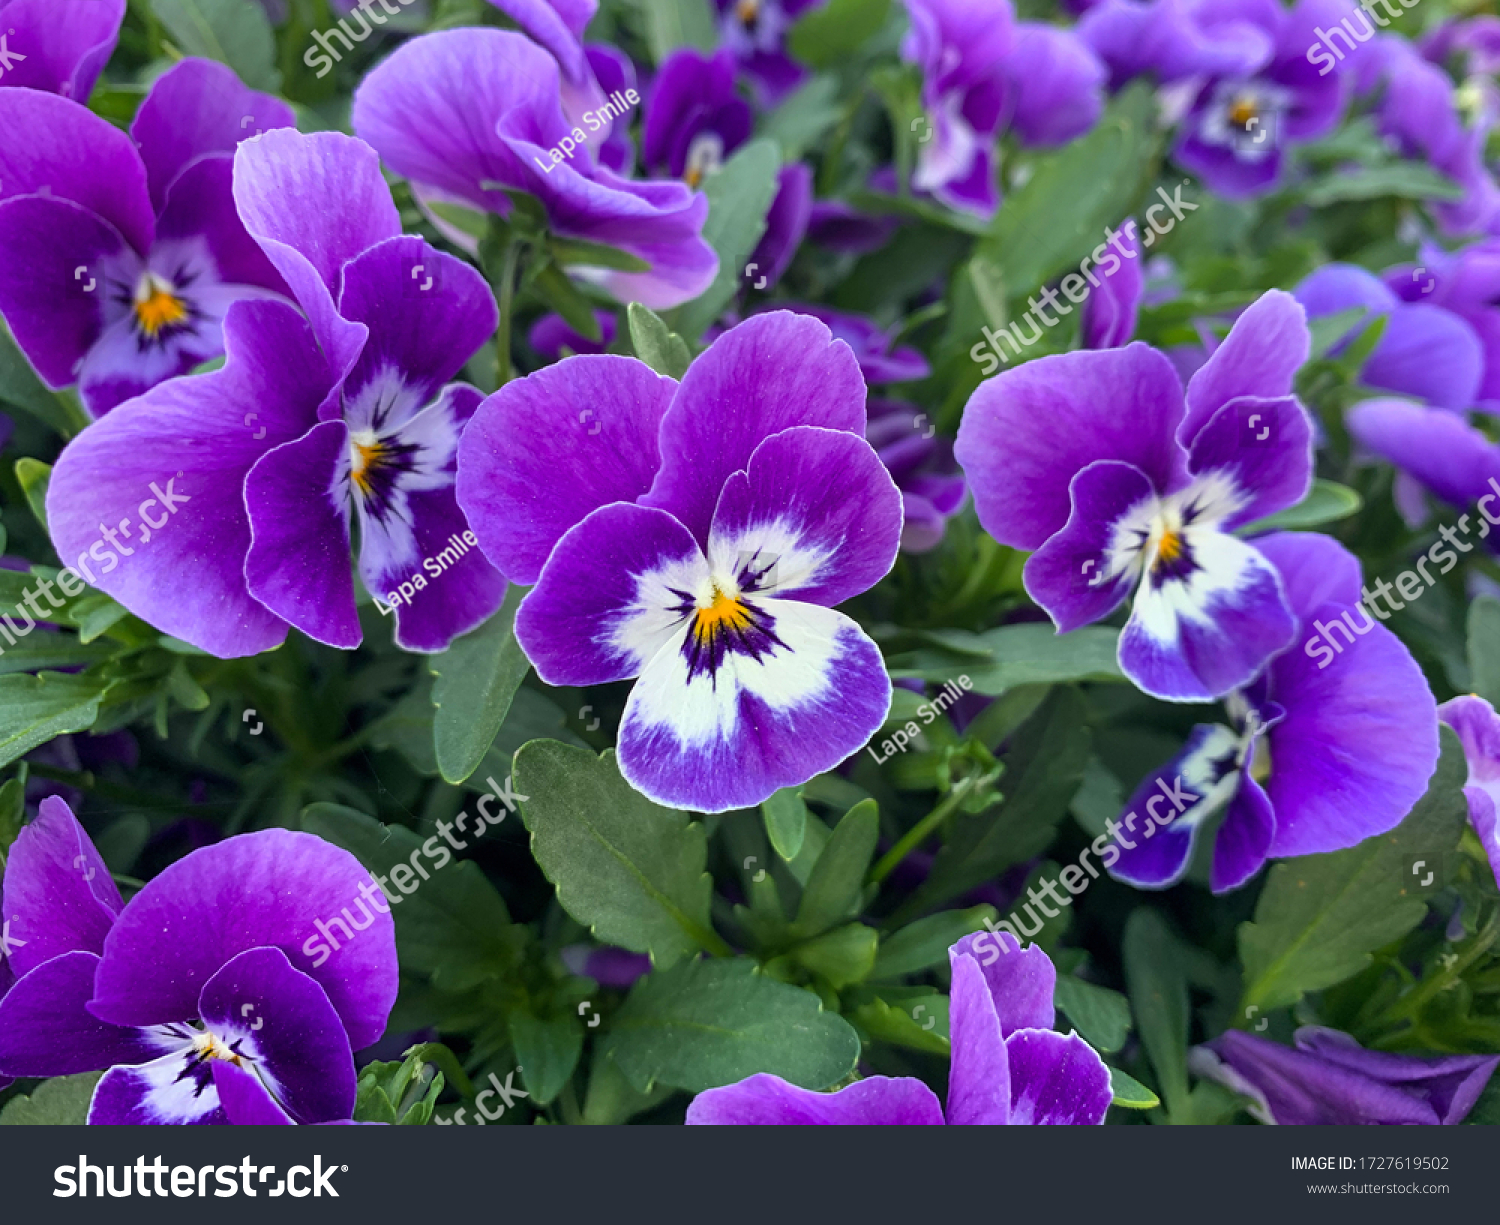 Violet white spring flowers viola cornuta close up, flower bed with horned violet pansies high angle view, floral spring wallpaper background #1727619502